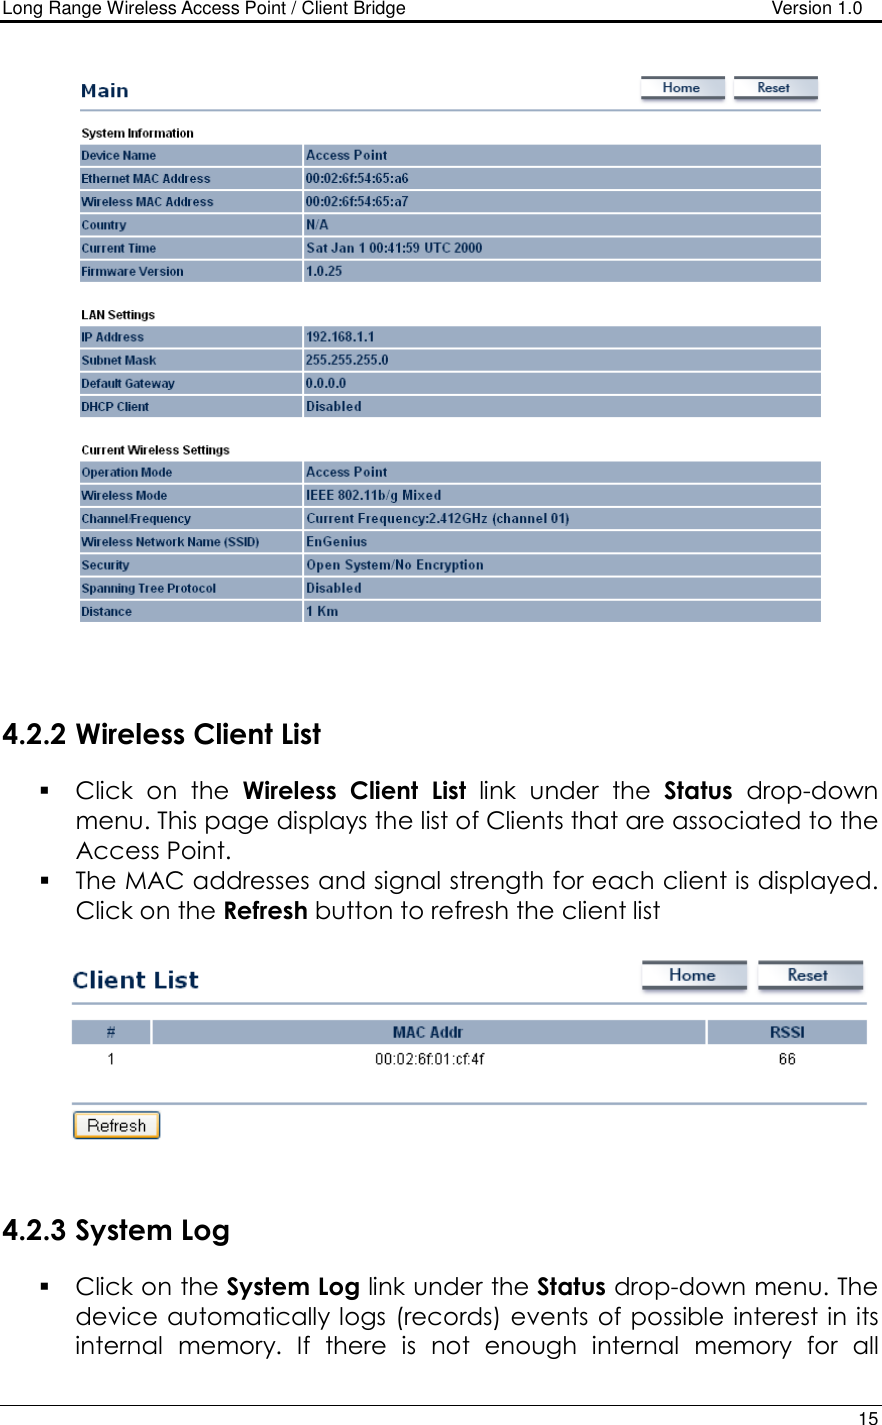 Long Range Wireless Access Point / Client Bridge                                   Version 1.0    15      4.2.2 Wireless Client List  Click  on  the  Wireless Client  List  link  under  the  Status  drop-down menu. This page displays the list of Clients that are associated to the Access Point.   The MAC addresses and signal strength for each client is displayed. Click on the Refresh button to refresh the client list      4.2.3 System Log   Click on the System Log link under the Status drop-down menu. The device automatically logs (records) events of possible interest in its internal  memory.  If  there  is  not  enough  internal  memory  for  all 